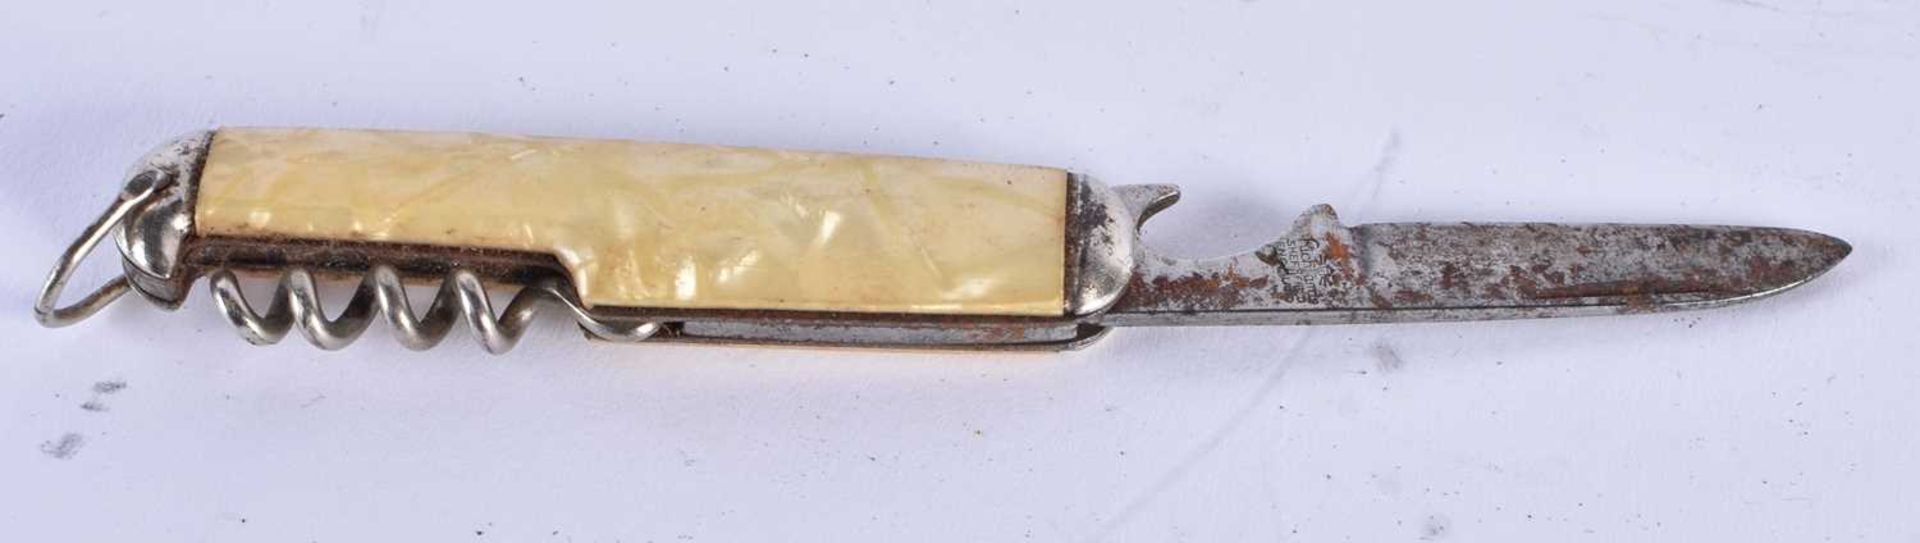 AN ANTIQUE HARRY LE MOINE COMBINATION KNIFE and a ST Dupont silver plated lighter. Largest 14 cm - Image 5 of 6